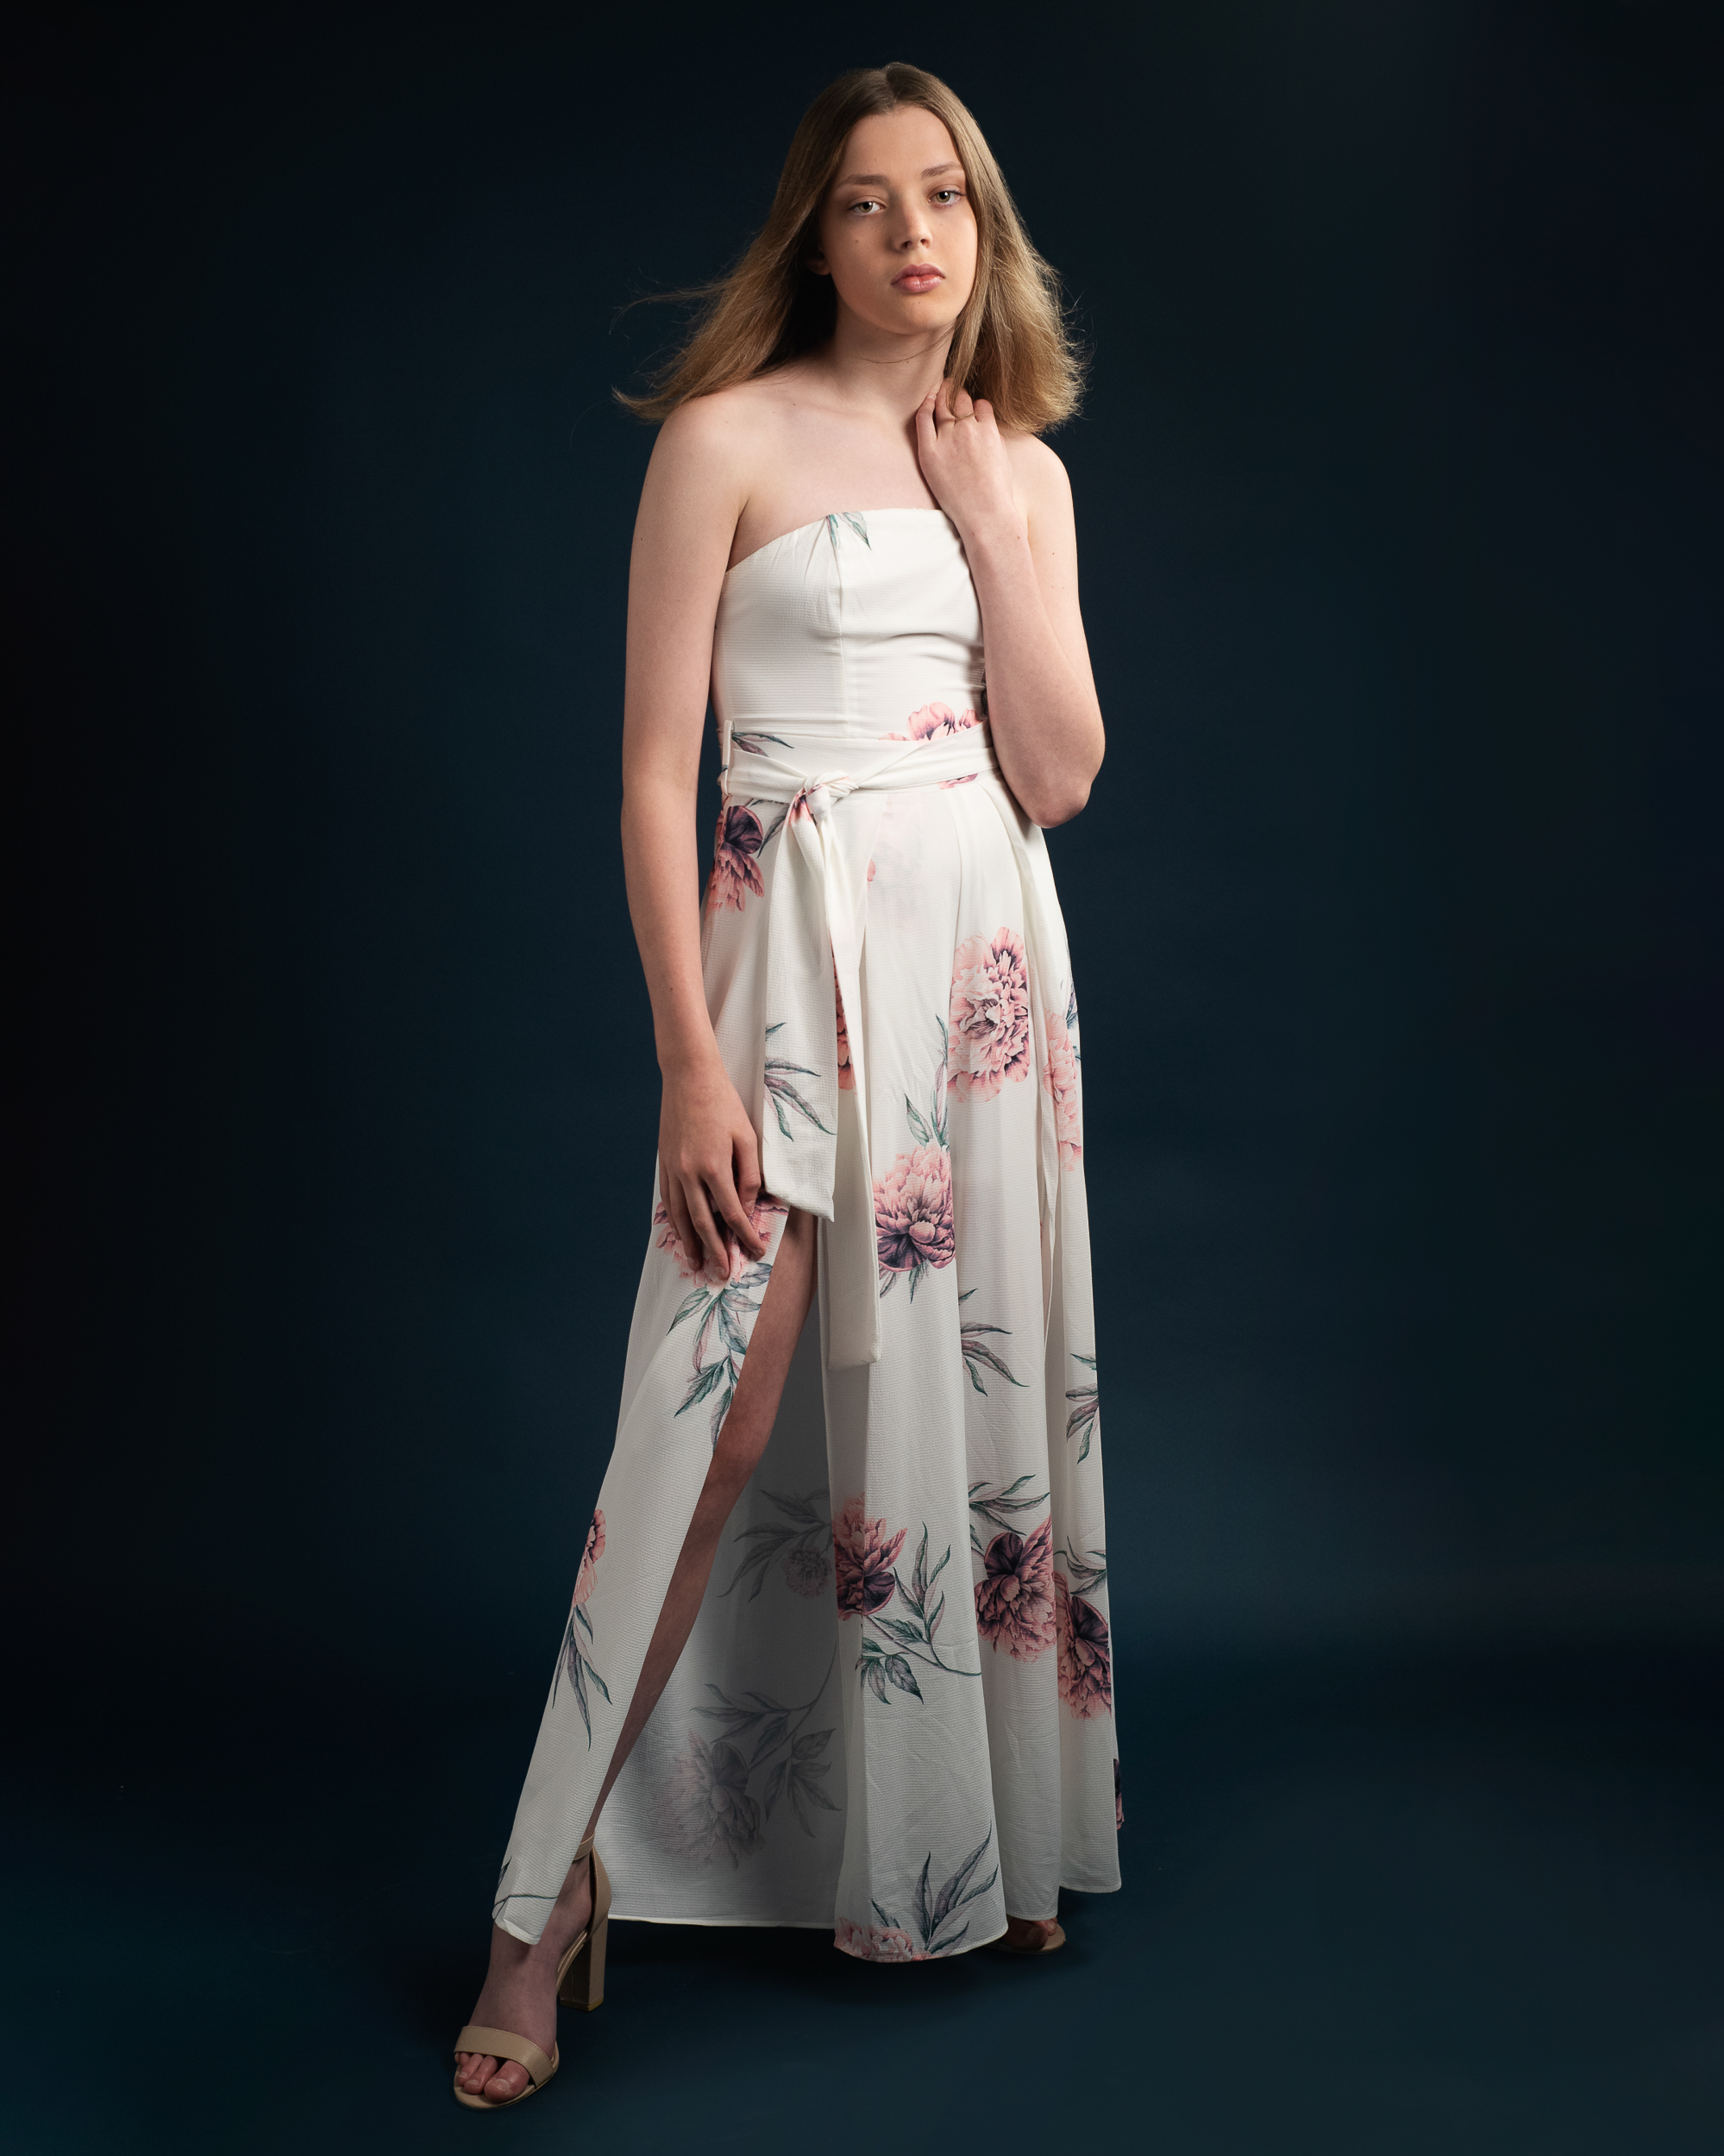 Teen model stands on navy background in Melbourne studio posing to the camera in a full length image. She wears a white floral dress and looks at the camera with a serious expression while wind blows her hair.